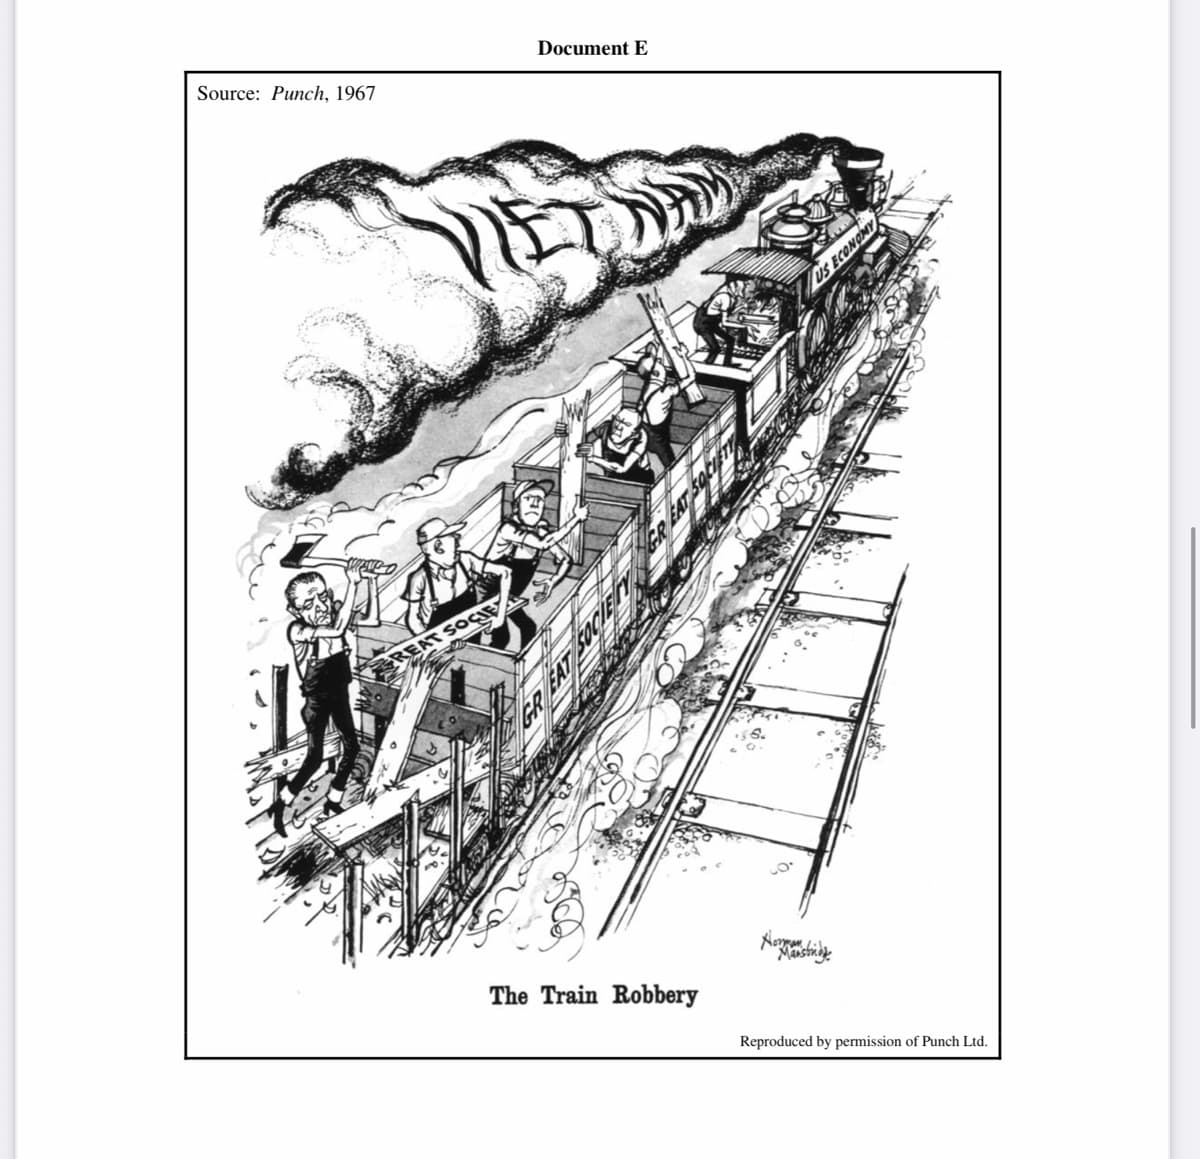 Source: Punch, 1967
REAT SOC
Document E
ER EAT SOC
The Train Robbery
US ECONOMY
Hormonas atsiting the
Reproduced by permission of Punch Ltd.